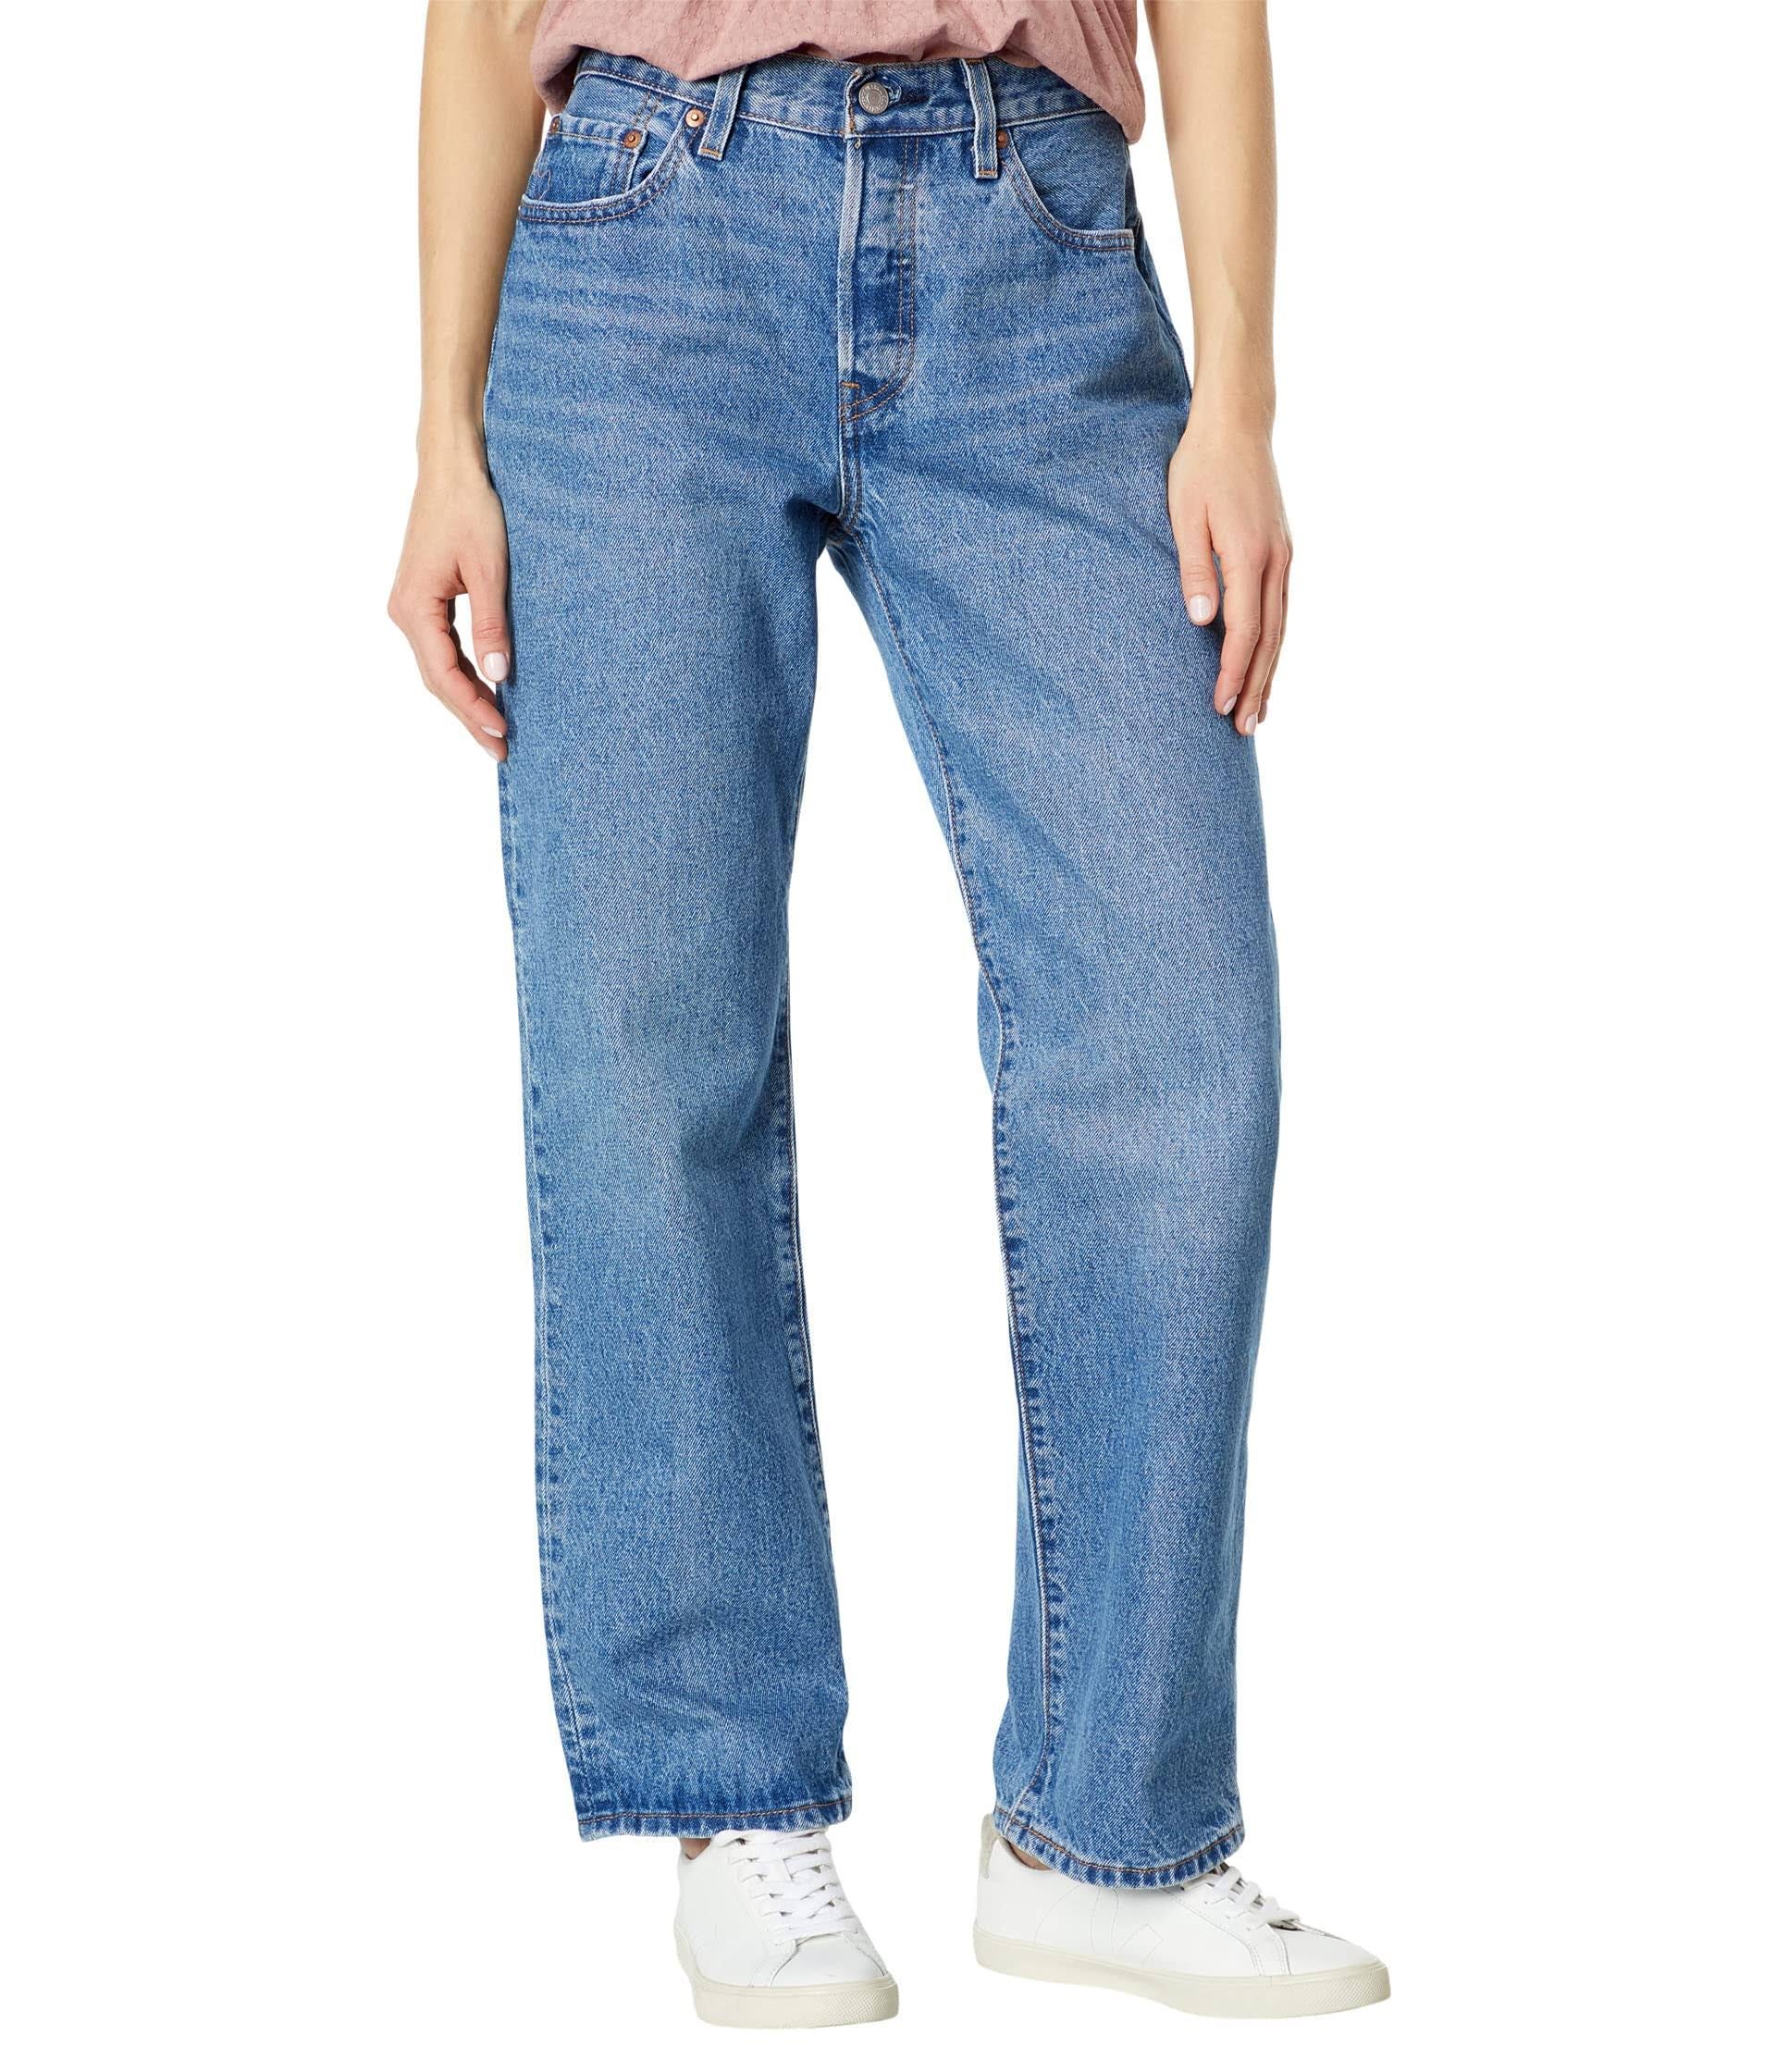 Levi's '90s Women's Jeans: Classic Fit and Relaxed Style | Image